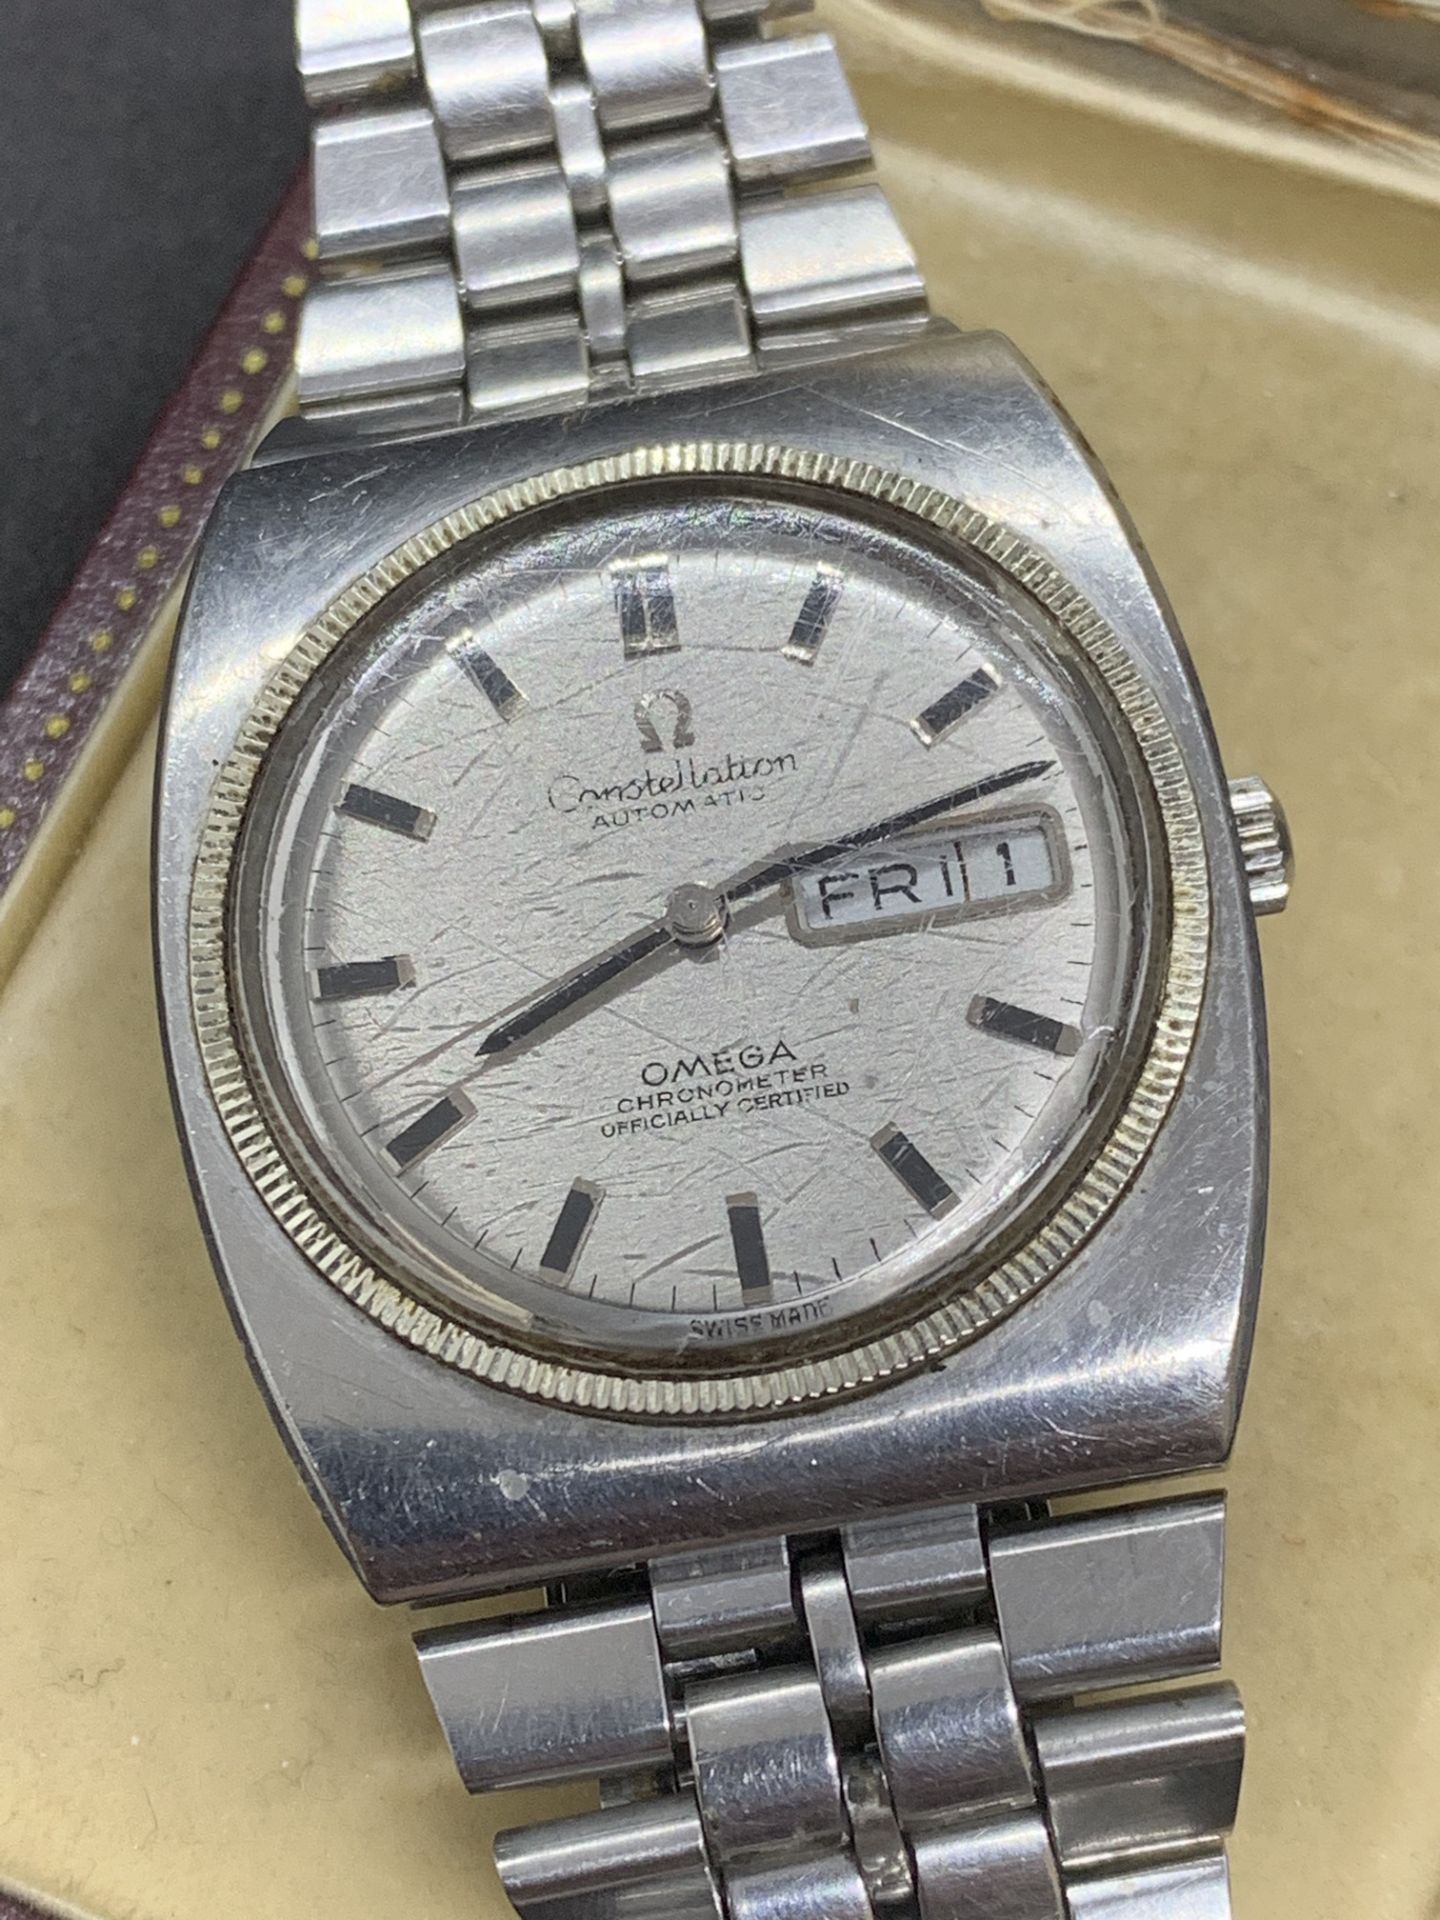 OMEGA CONSTELLATION STAINLESS STEEL WATCH - Image 2 of 4